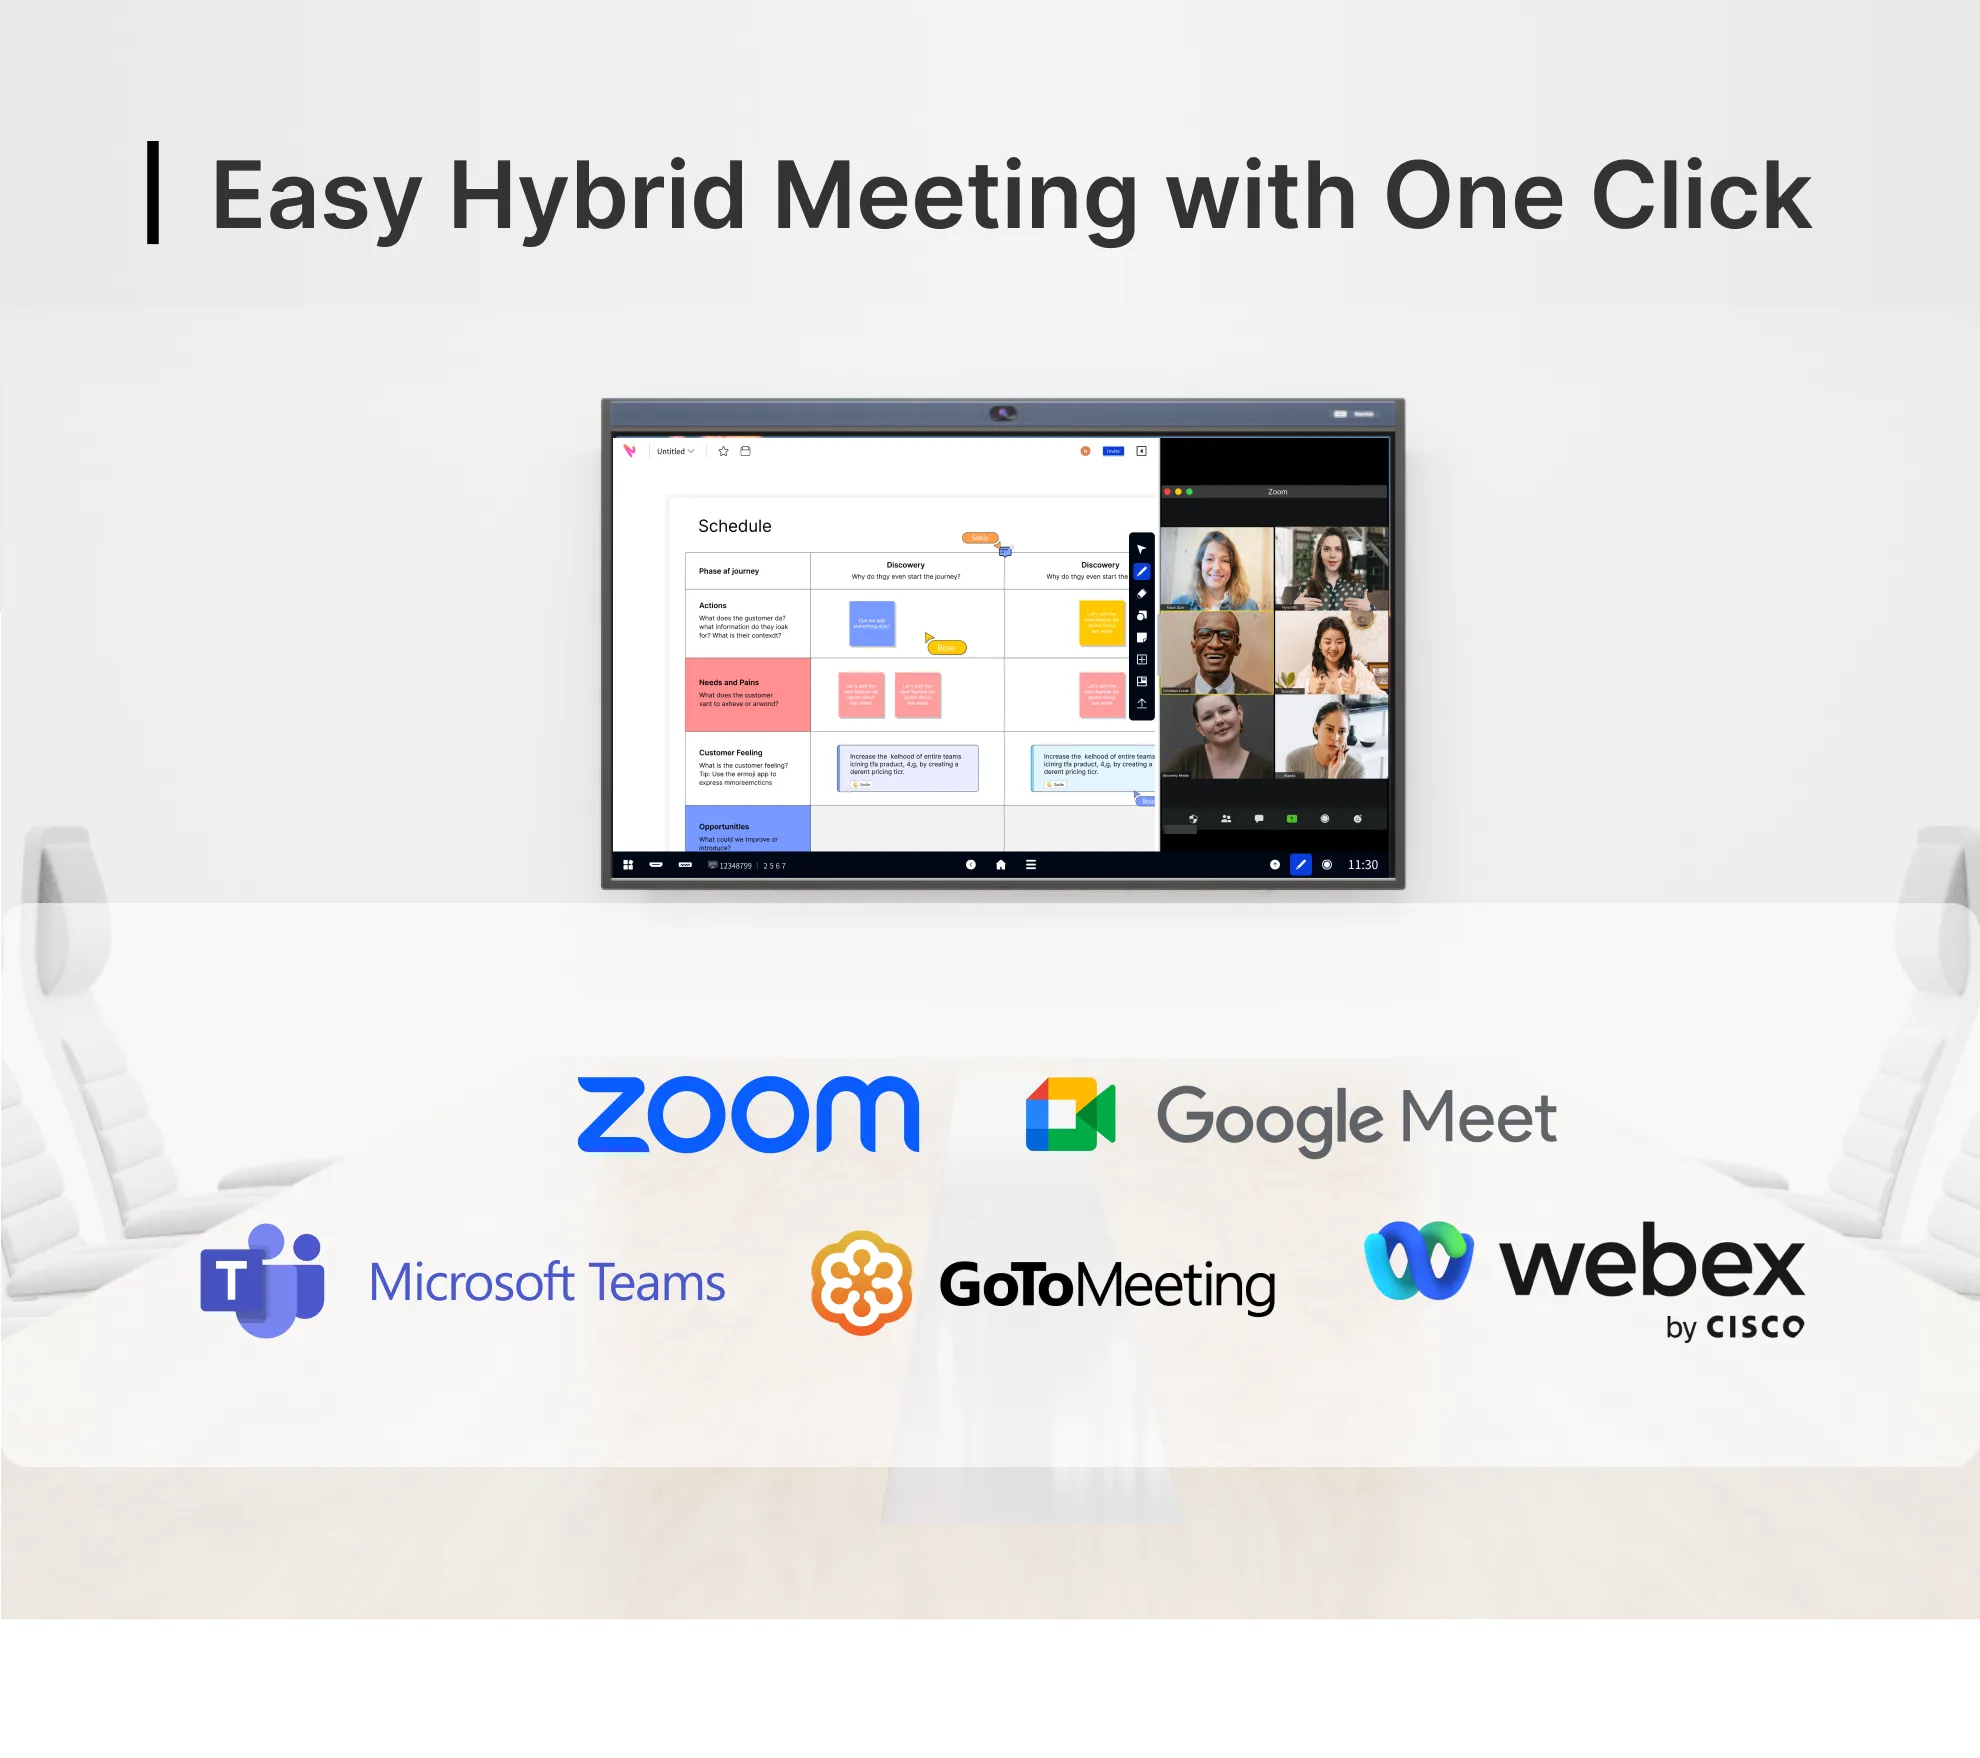 Easy Hybrid Meeting with One Click